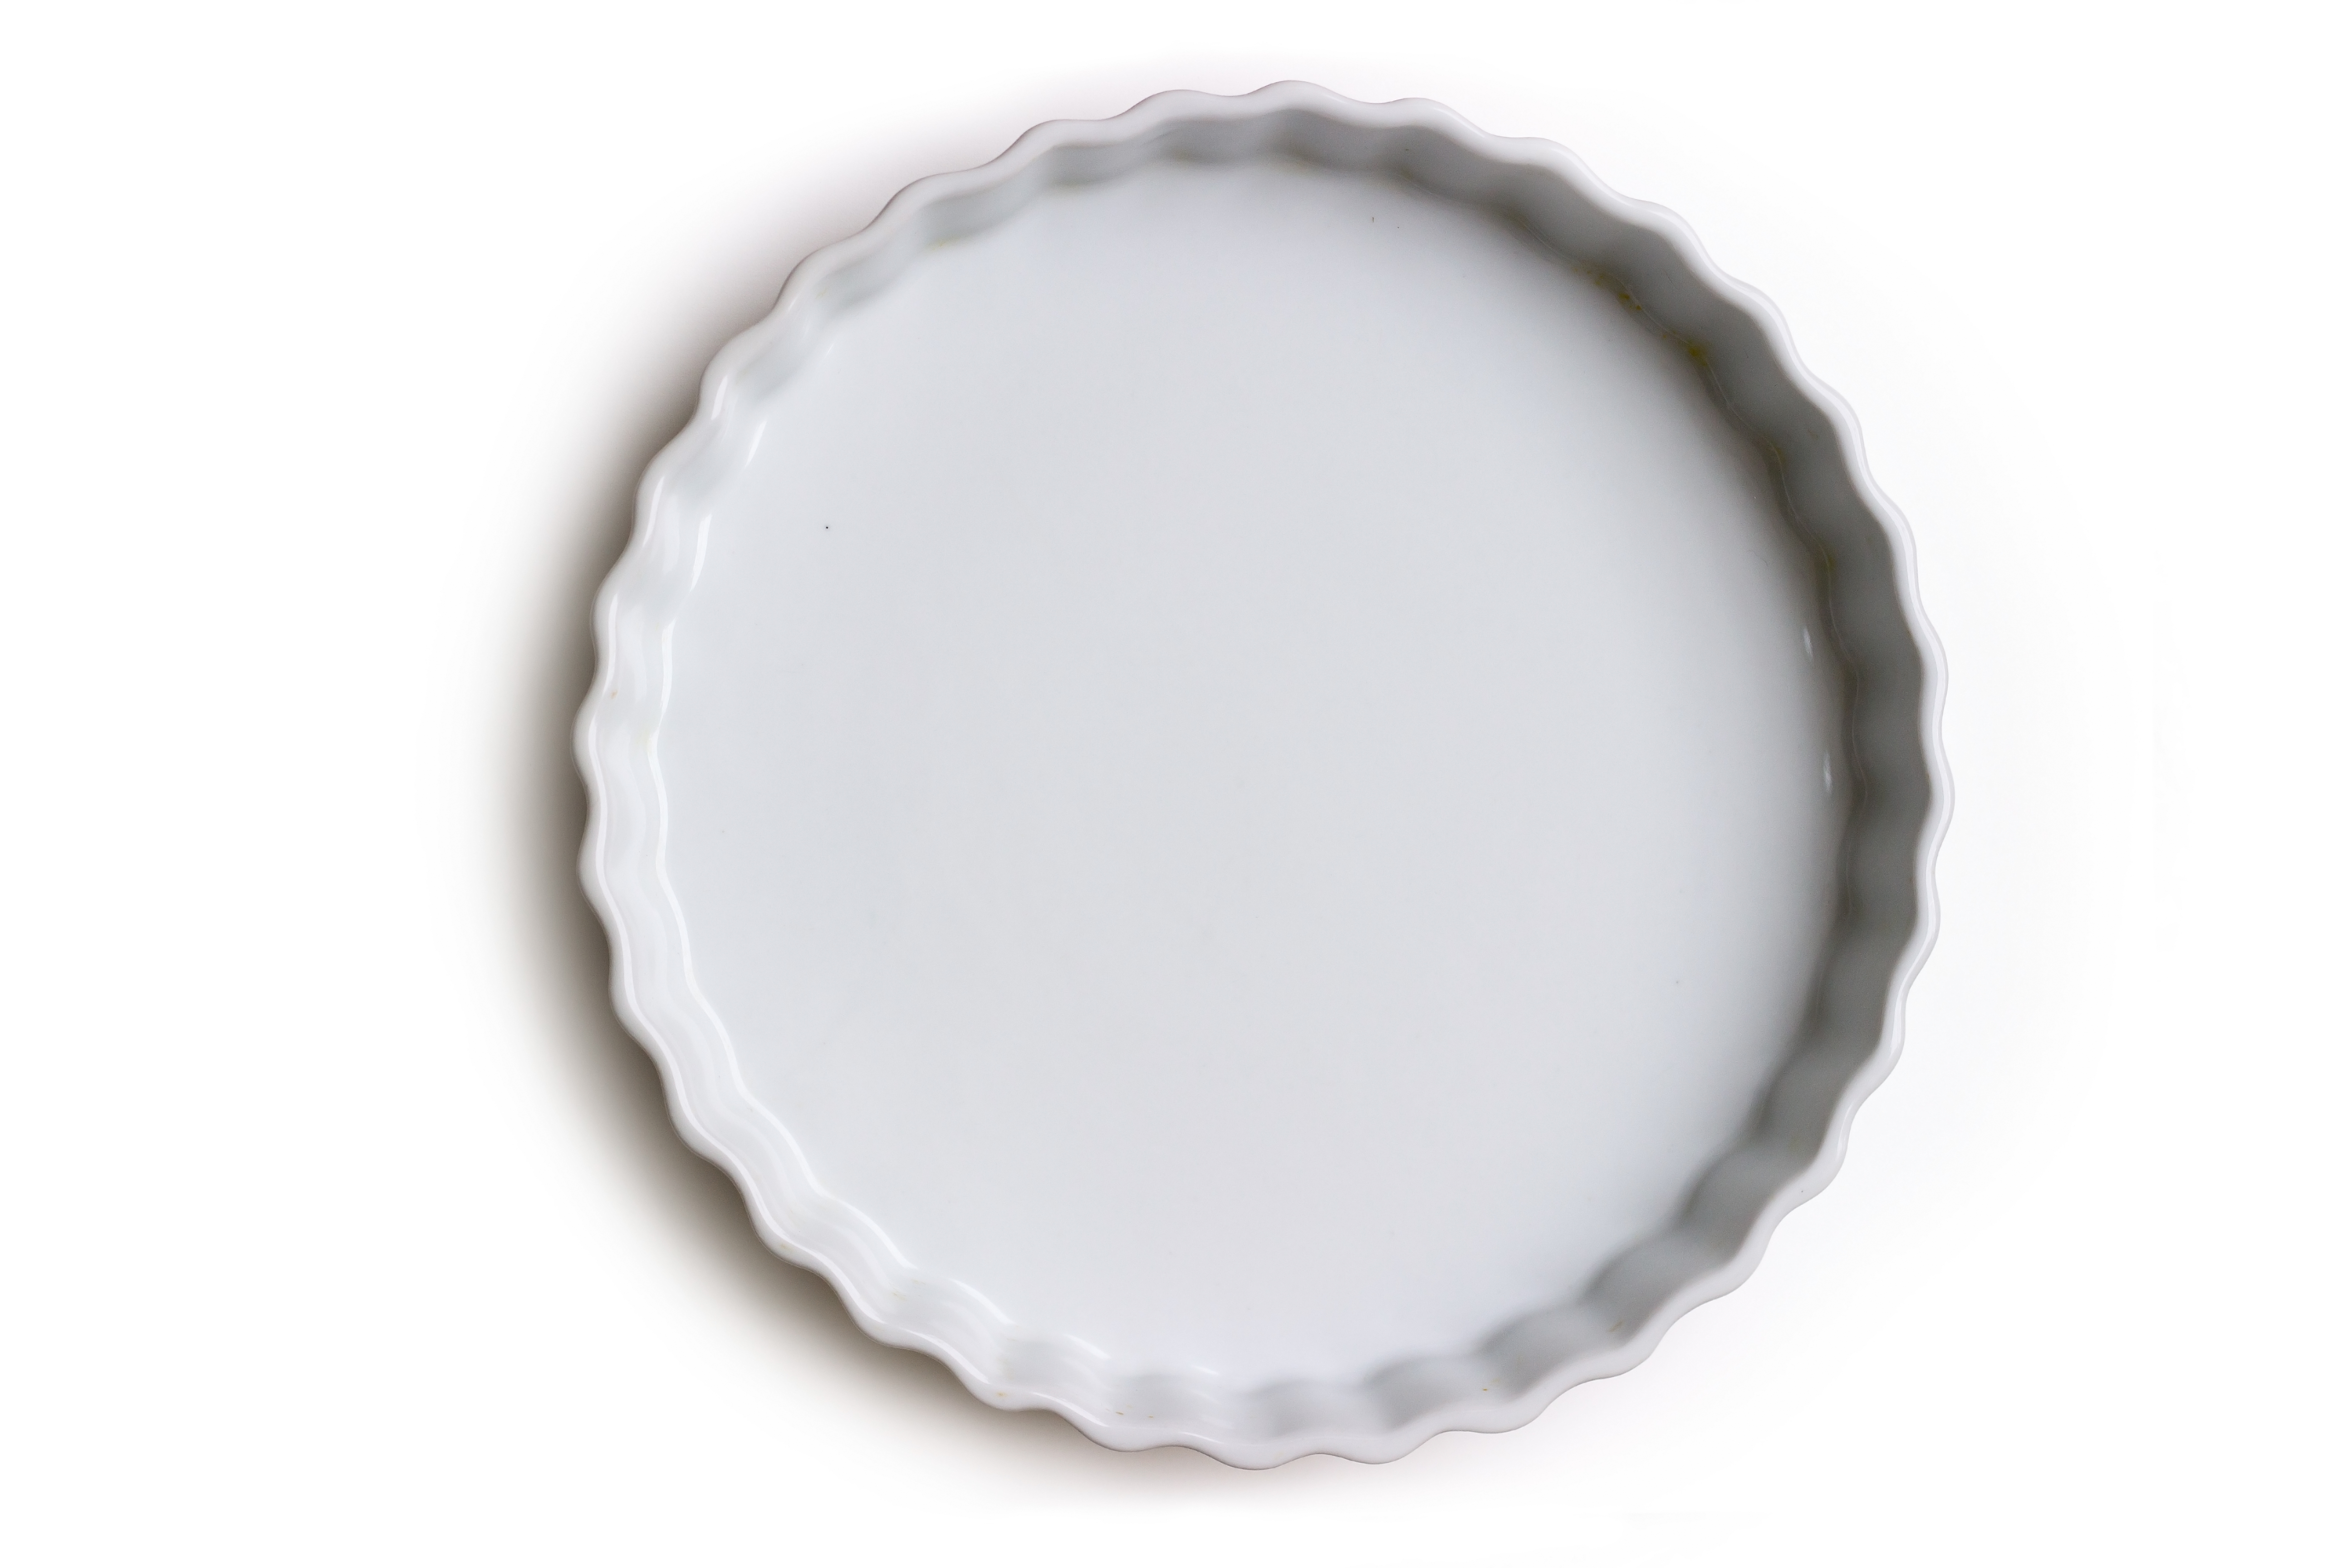 A ceramic pie dish | Source: Getty Images